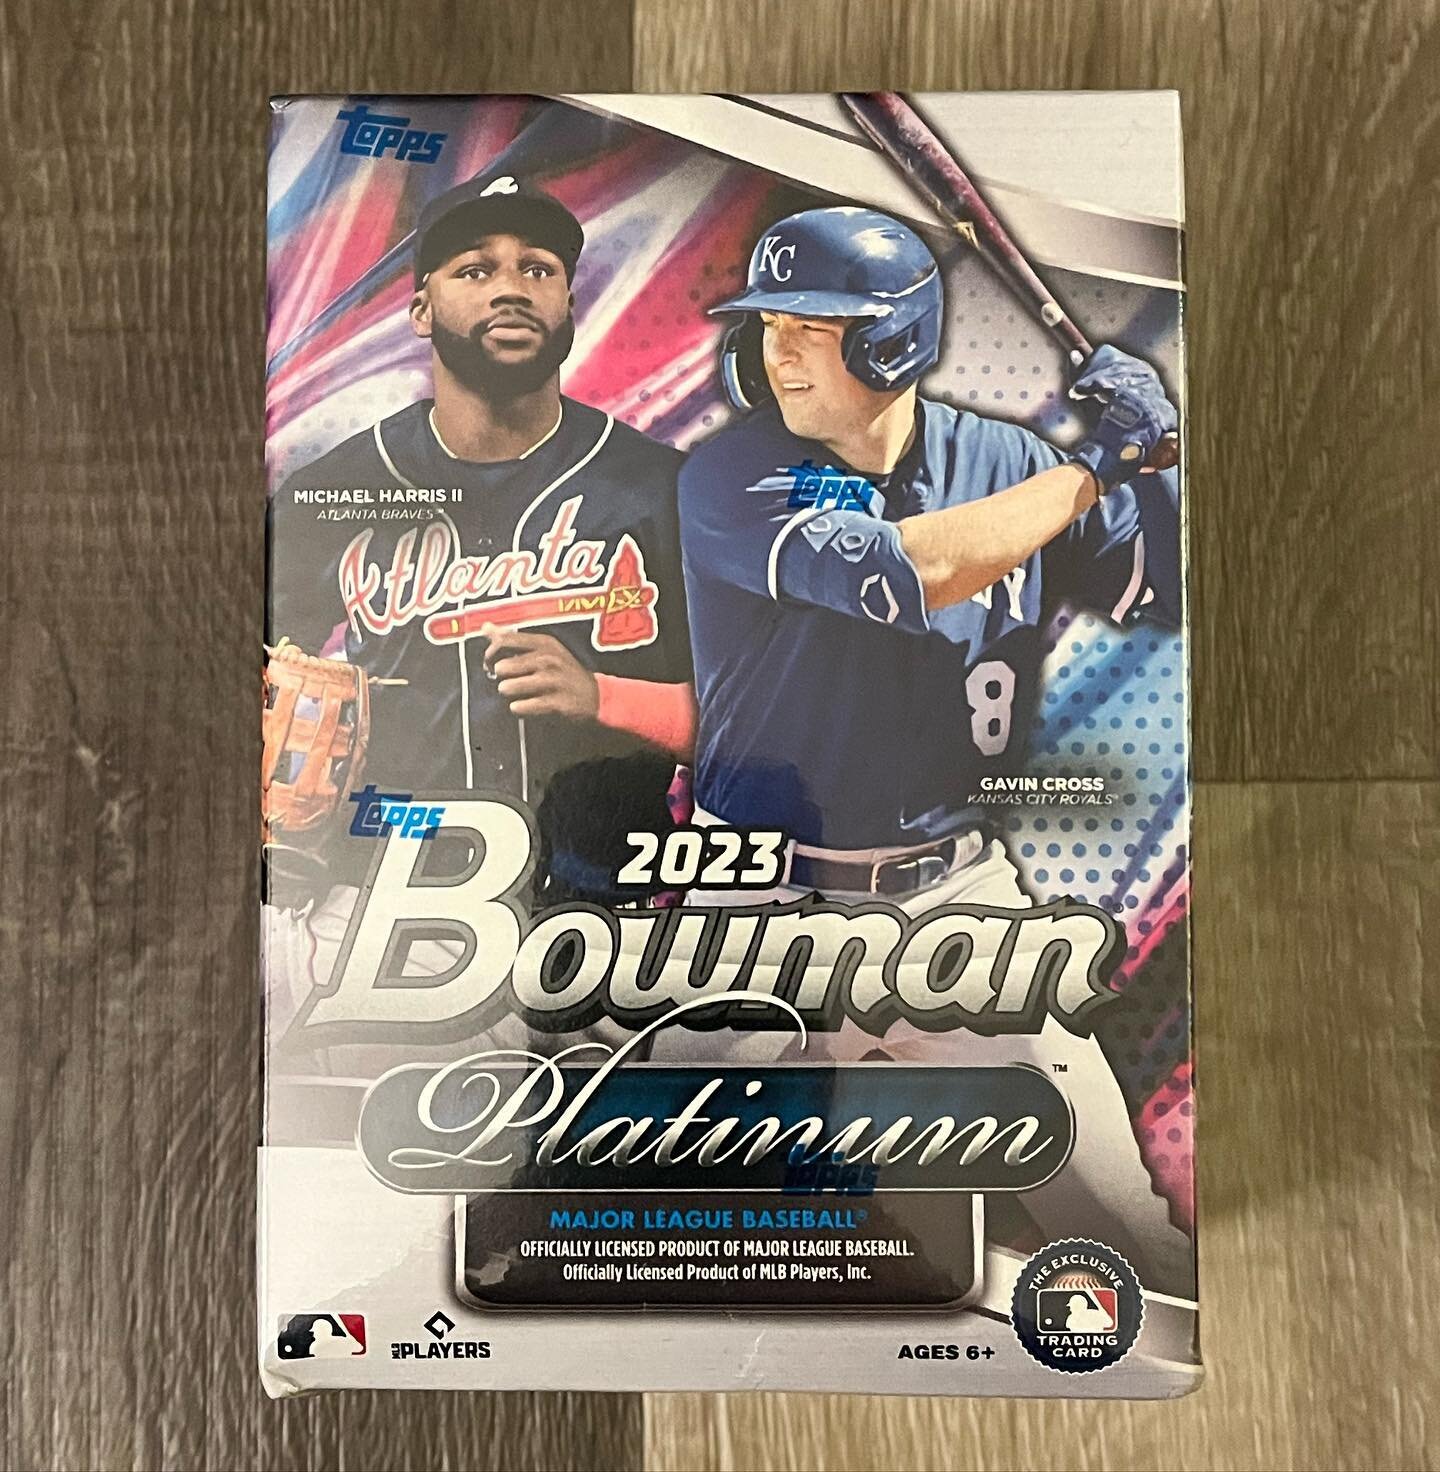 Happy Opening Day! To celebrate I opened a blaster of 2023 Bowman Platinum. Here are the best of the base cards, along with the Top Prospects, Inserts and Ice Parallels. #collect #OpeningDay #Bowman #Platinum